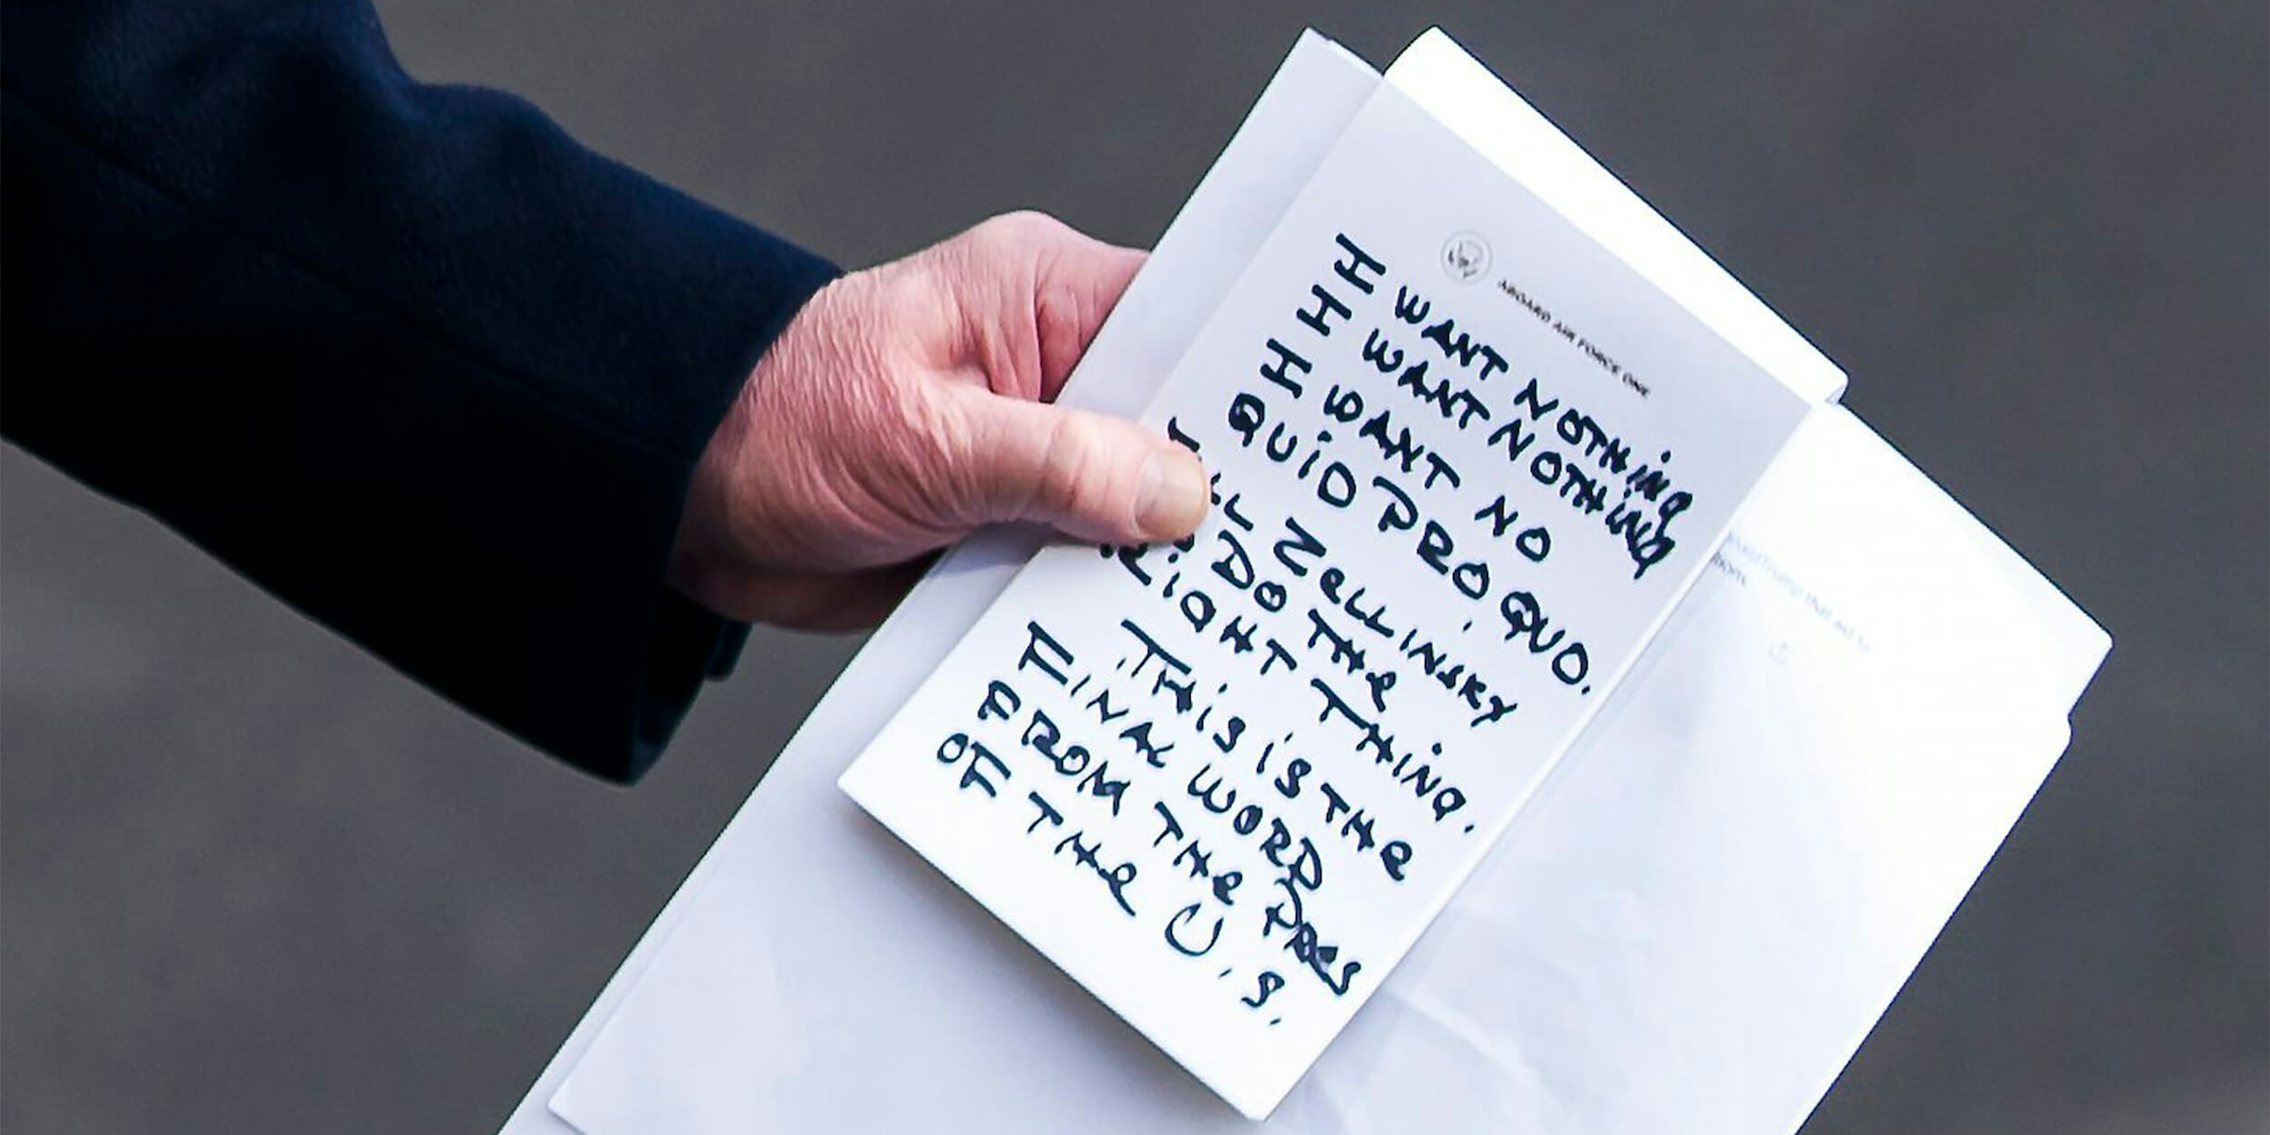 Donald Trump handwritten 'I want nothing' note